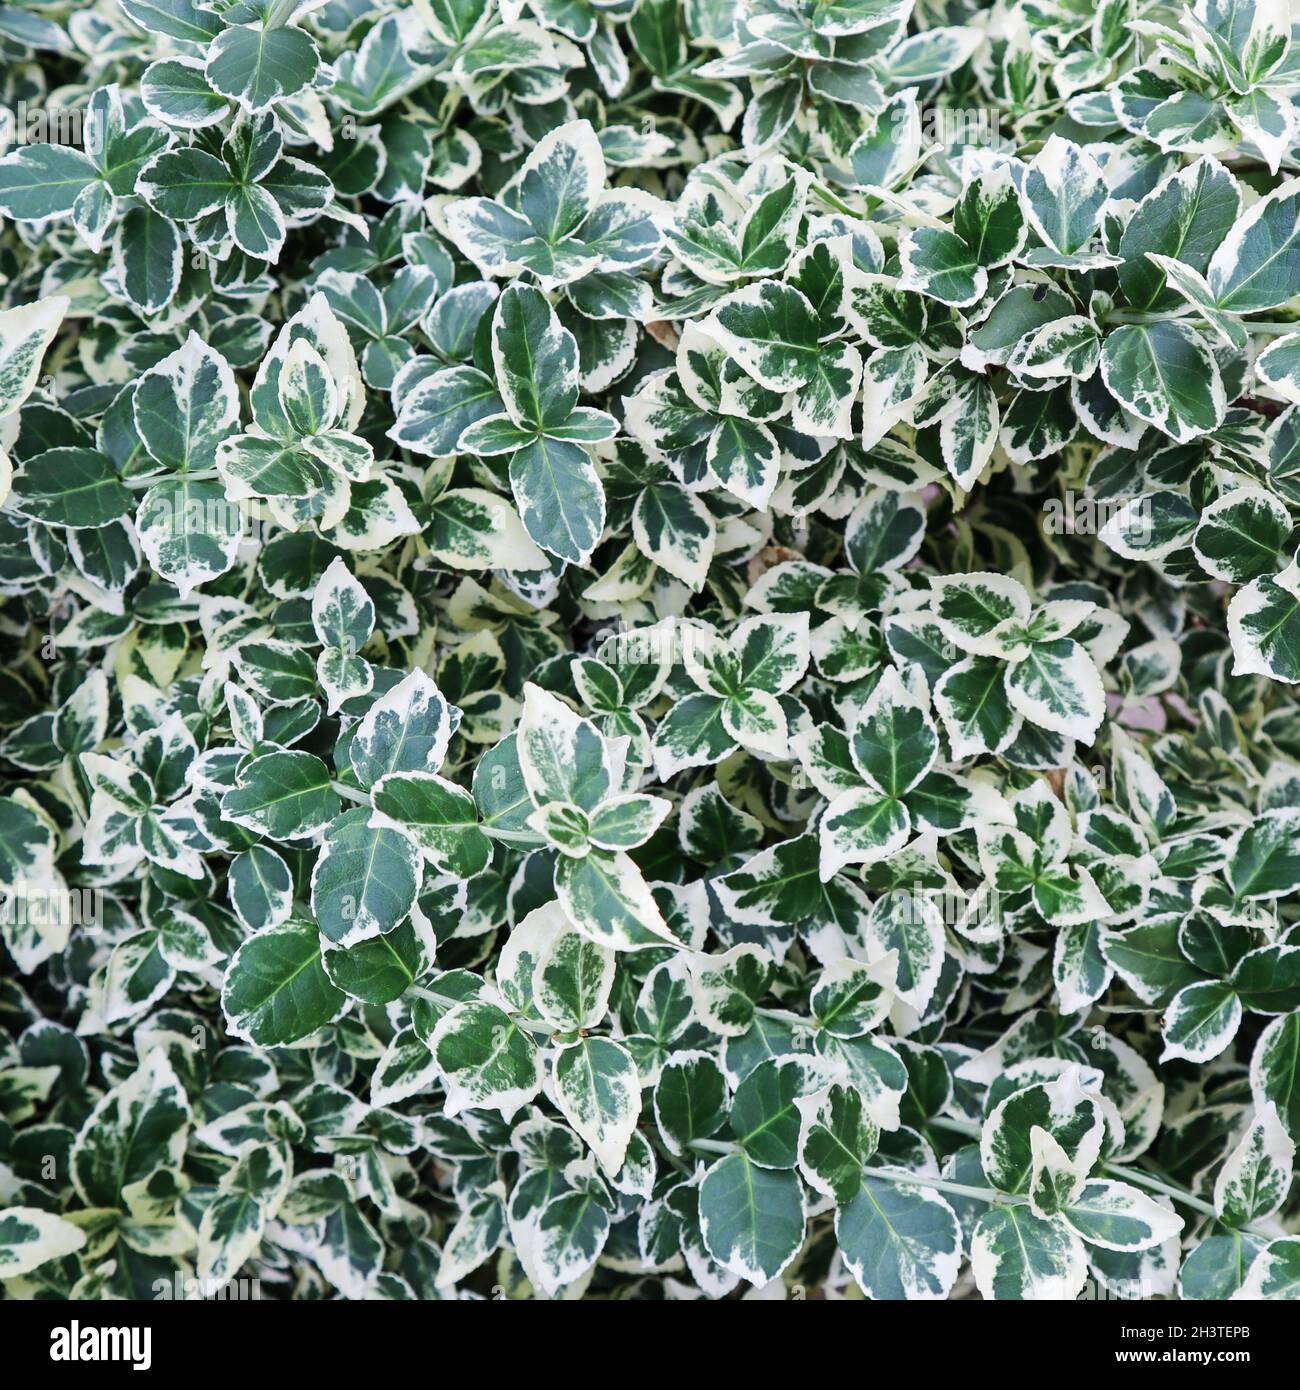 Natural background. Euonymus fortunei Emerald Gaiety with green and white leaves Stock Photo